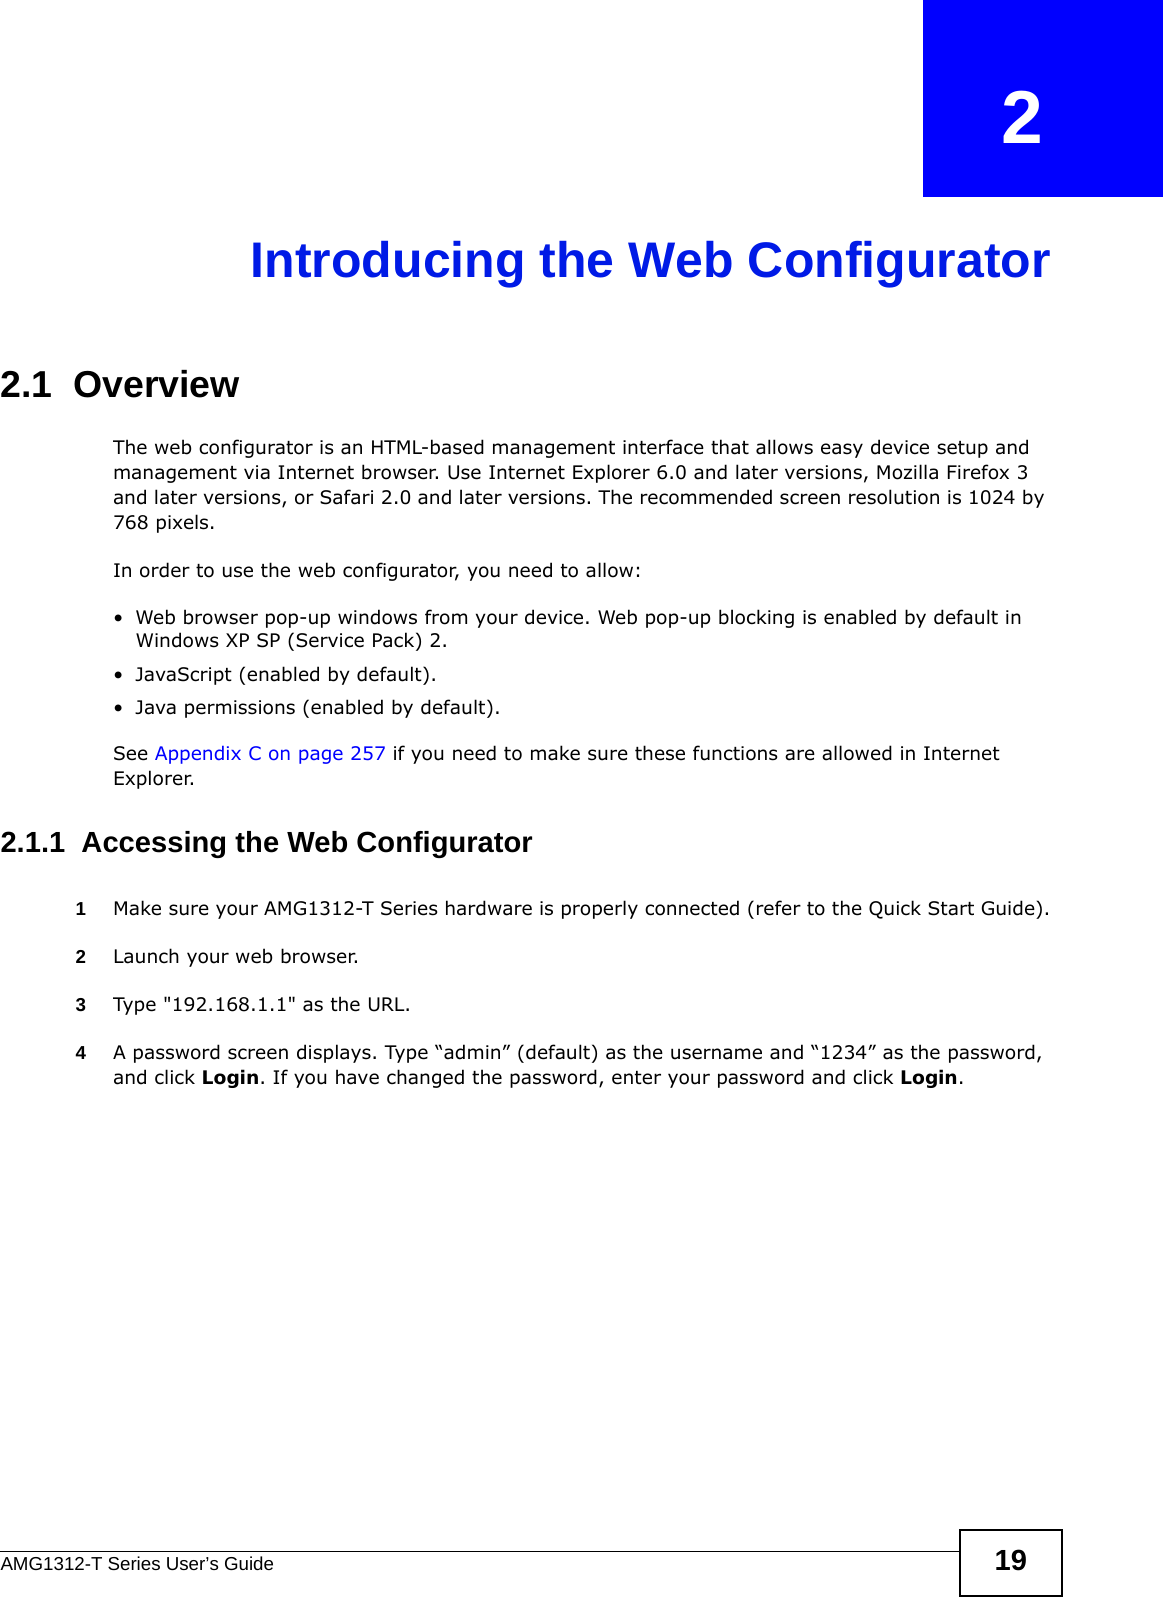 AMG1312-T Series User’s Guide 19CHAPTER   2Introducing the Web Configurator2.1  OverviewThe web configurator is an HTML-based management interface that allows easy device setup and management via Internet browser. Use Internet Explorer 6.0 and later versions, Mozilla Firefox 3 and later versions, or Safari 2.0 and later versions. The recommended screen resolution is 1024 by 768 pixels.In order to use the web configurator, you need to allow:• Web browser pop-up windows from your device. Web pop-up blocking is enabled by default in Windows XP SP (Service Pack) 2.• JavaScript (enabled by default).• Java permissions (enabled by default).See Appendix C on page 257 if you need to make sure these functions are allowed in Internet Explorer.2.1.1  Accessing the Web Configurator1Make sure your AMG1312-T Series hardware is properly connected (refer to the Quick Start Guide).2Launch your web browser.3Type &quot;192.168.1.1&quot; as the URL.4A password screen displays. Type “admin” (default) as the username and “1234” as the password, and click Login. If you have changed the password, enter your password and click Login. 